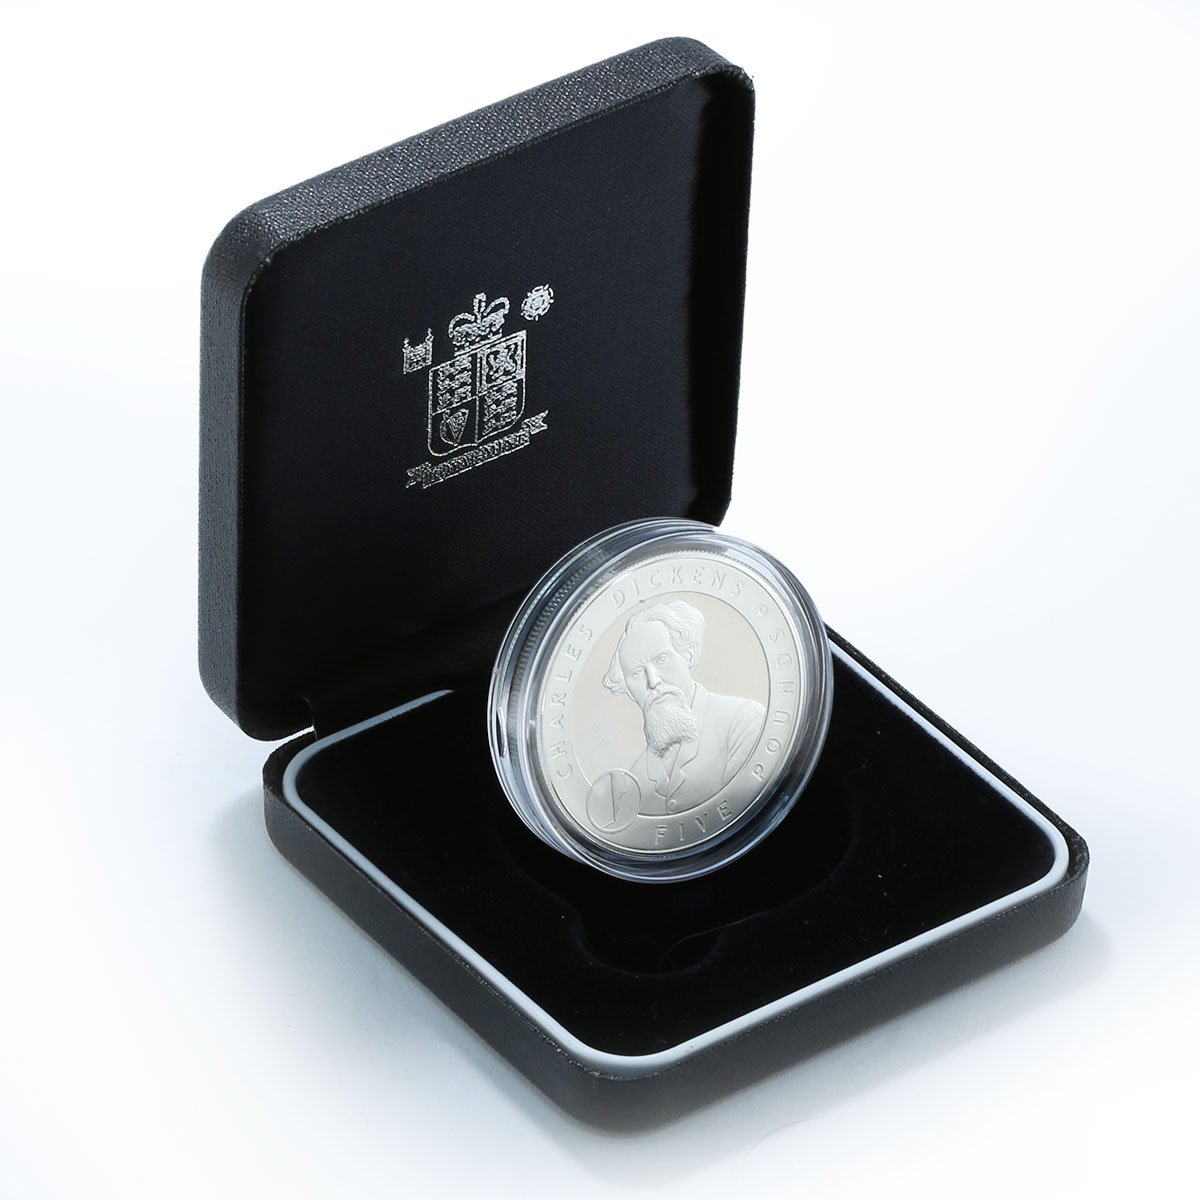 Alderney 5 Pounds Charles Dickens Literature proof silver coin 2006